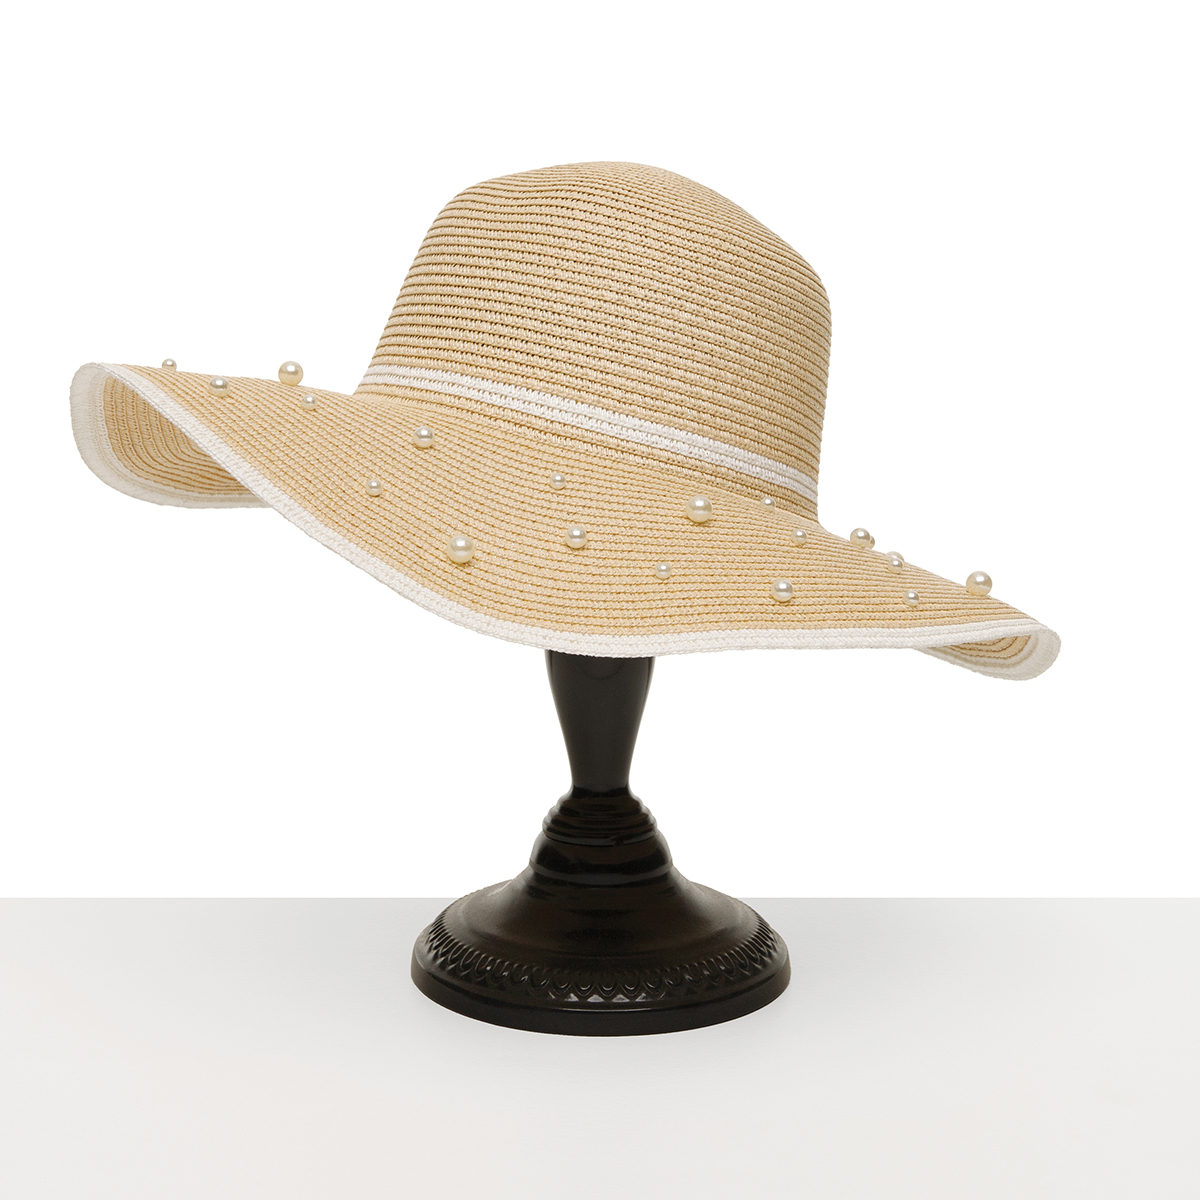 HAT BEIGE WHITE TRIM AND PEARLS